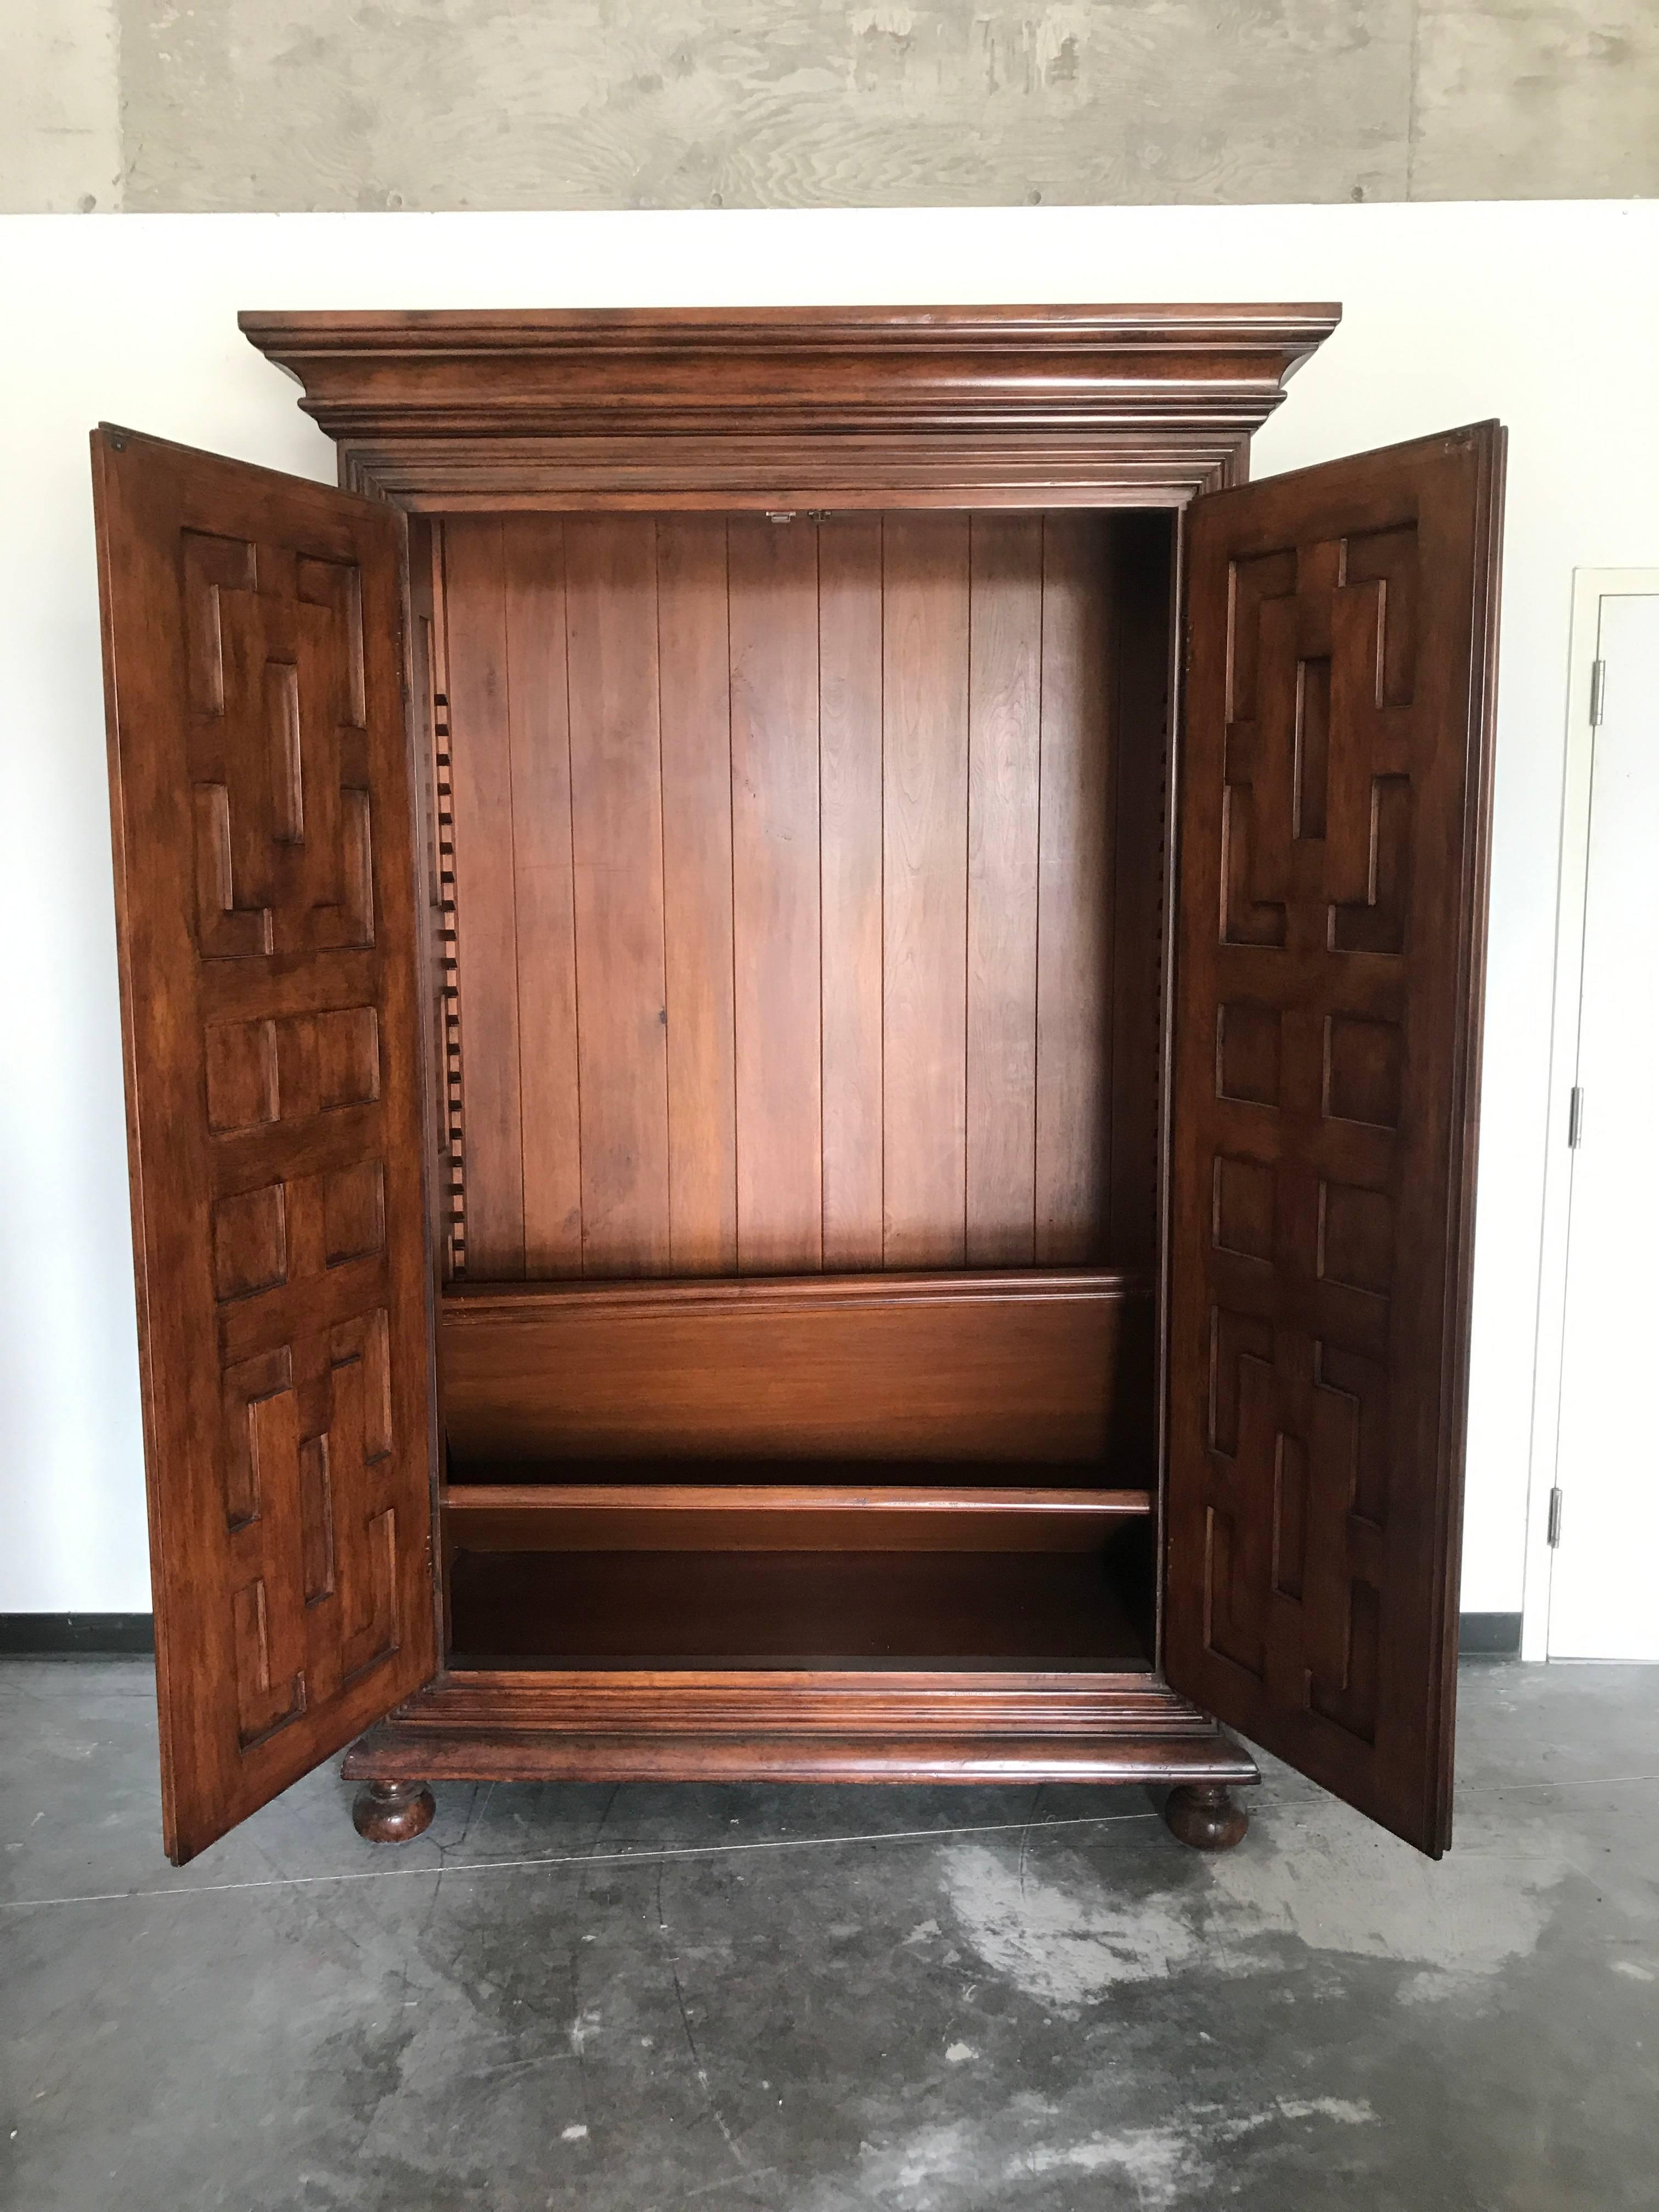 Carved Geometric Armoire by Charles Pollock for the William Switzer Collection